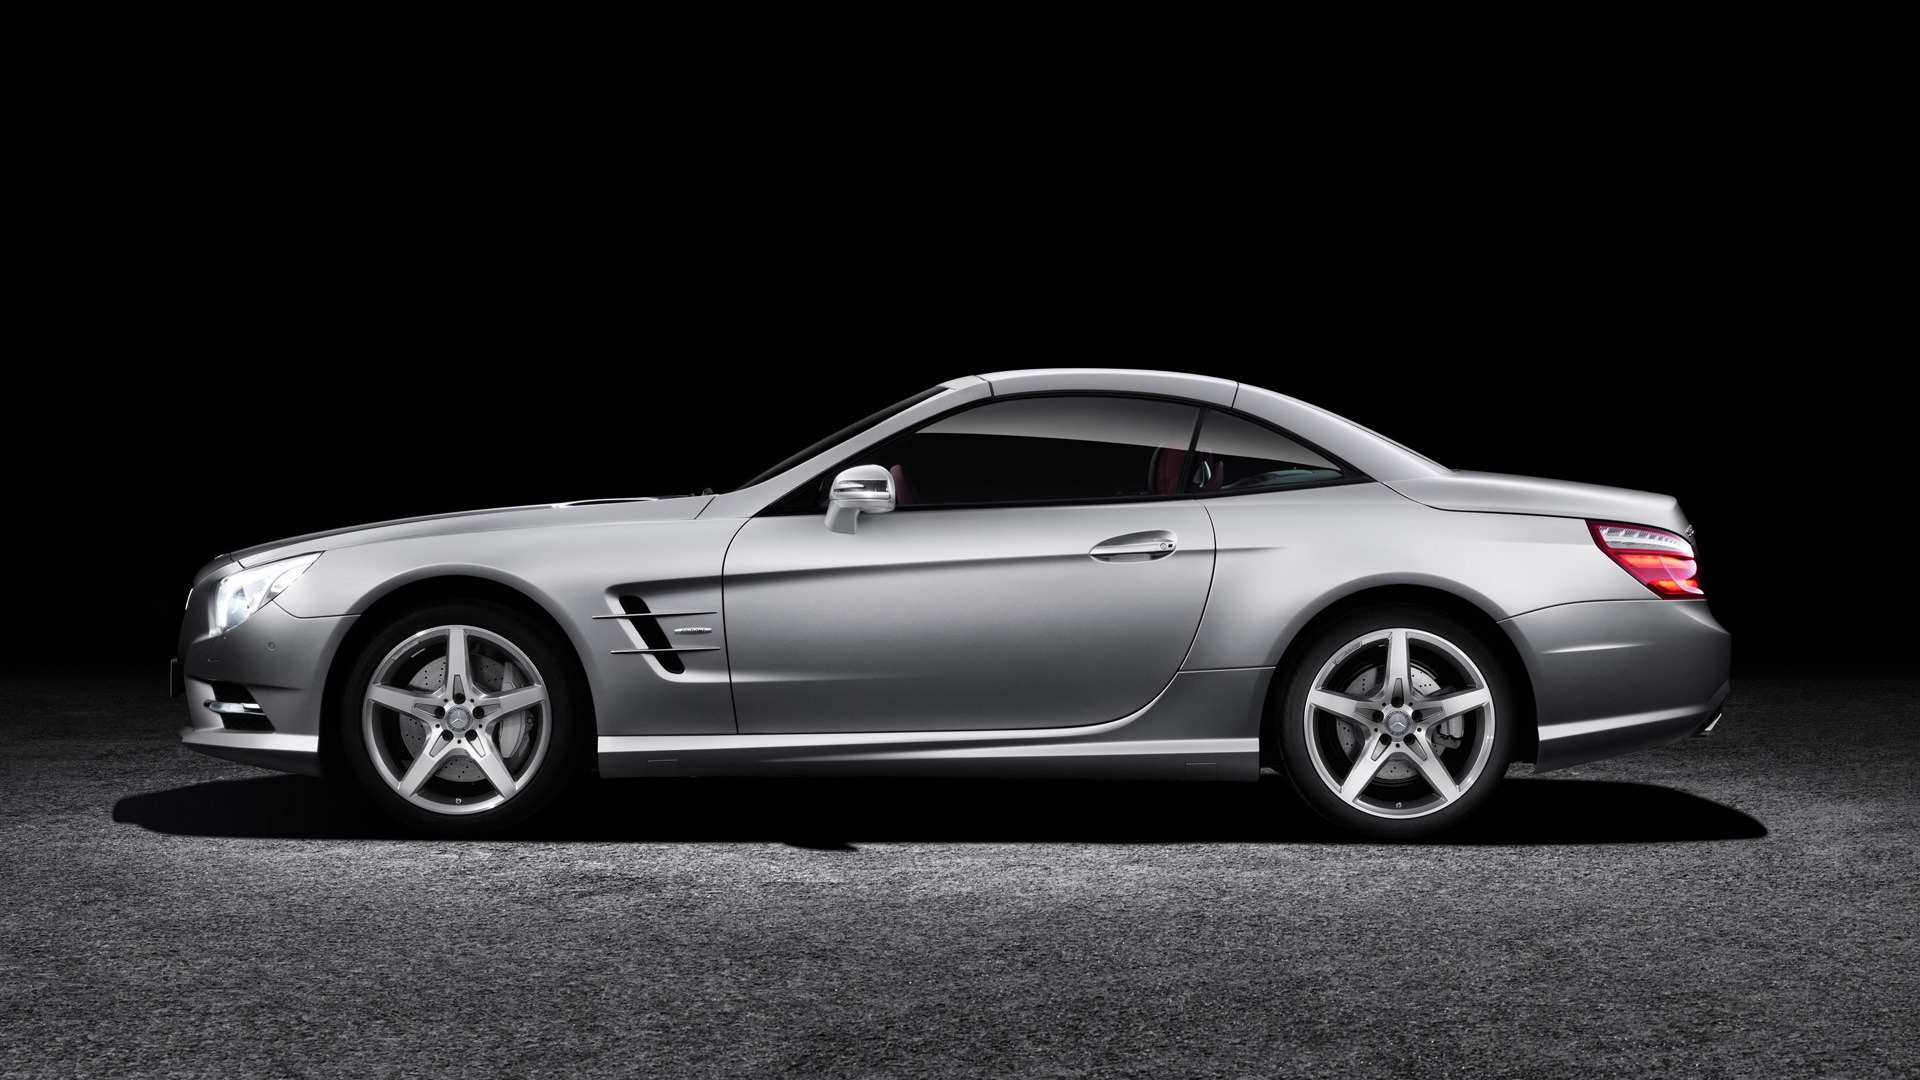 2012 Mercedes SL Side VIew for 1920 x 1080 HDTV 1080p resolution